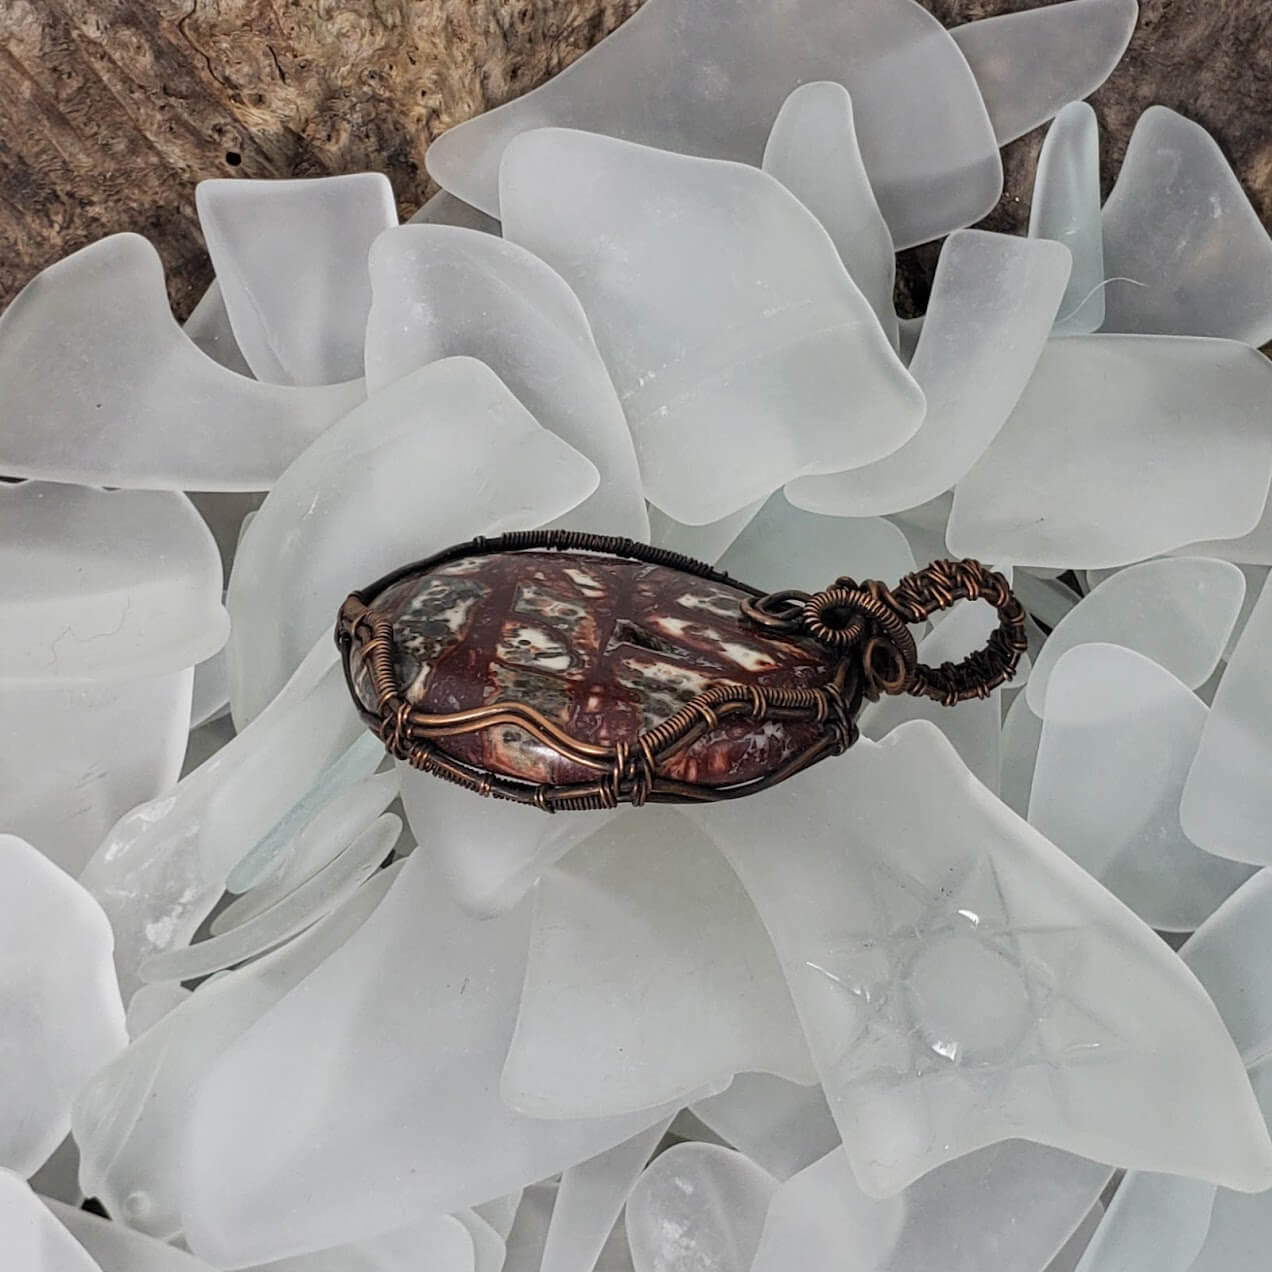 Crazy Lace Agate and Copper Pendant - Mother Of Metal - crazy lace agate - For Her - For Him-Charms & Pendants